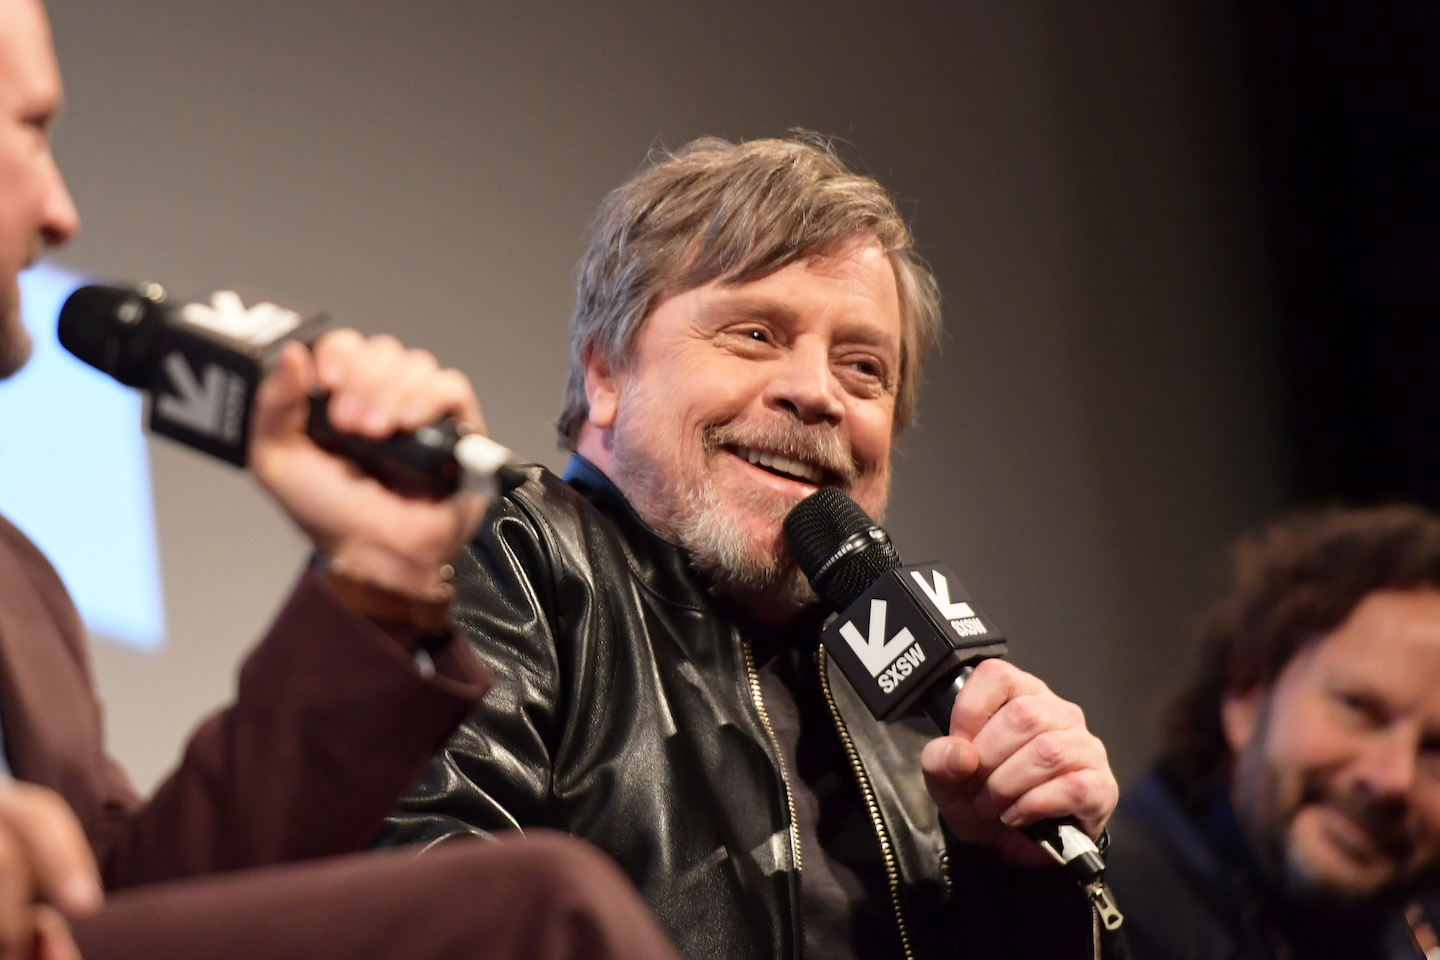 Mark Hamill at the The Director and The Jedi World Premiere. Photo by Matt Winkelmeyer/Getty Images for SXSW